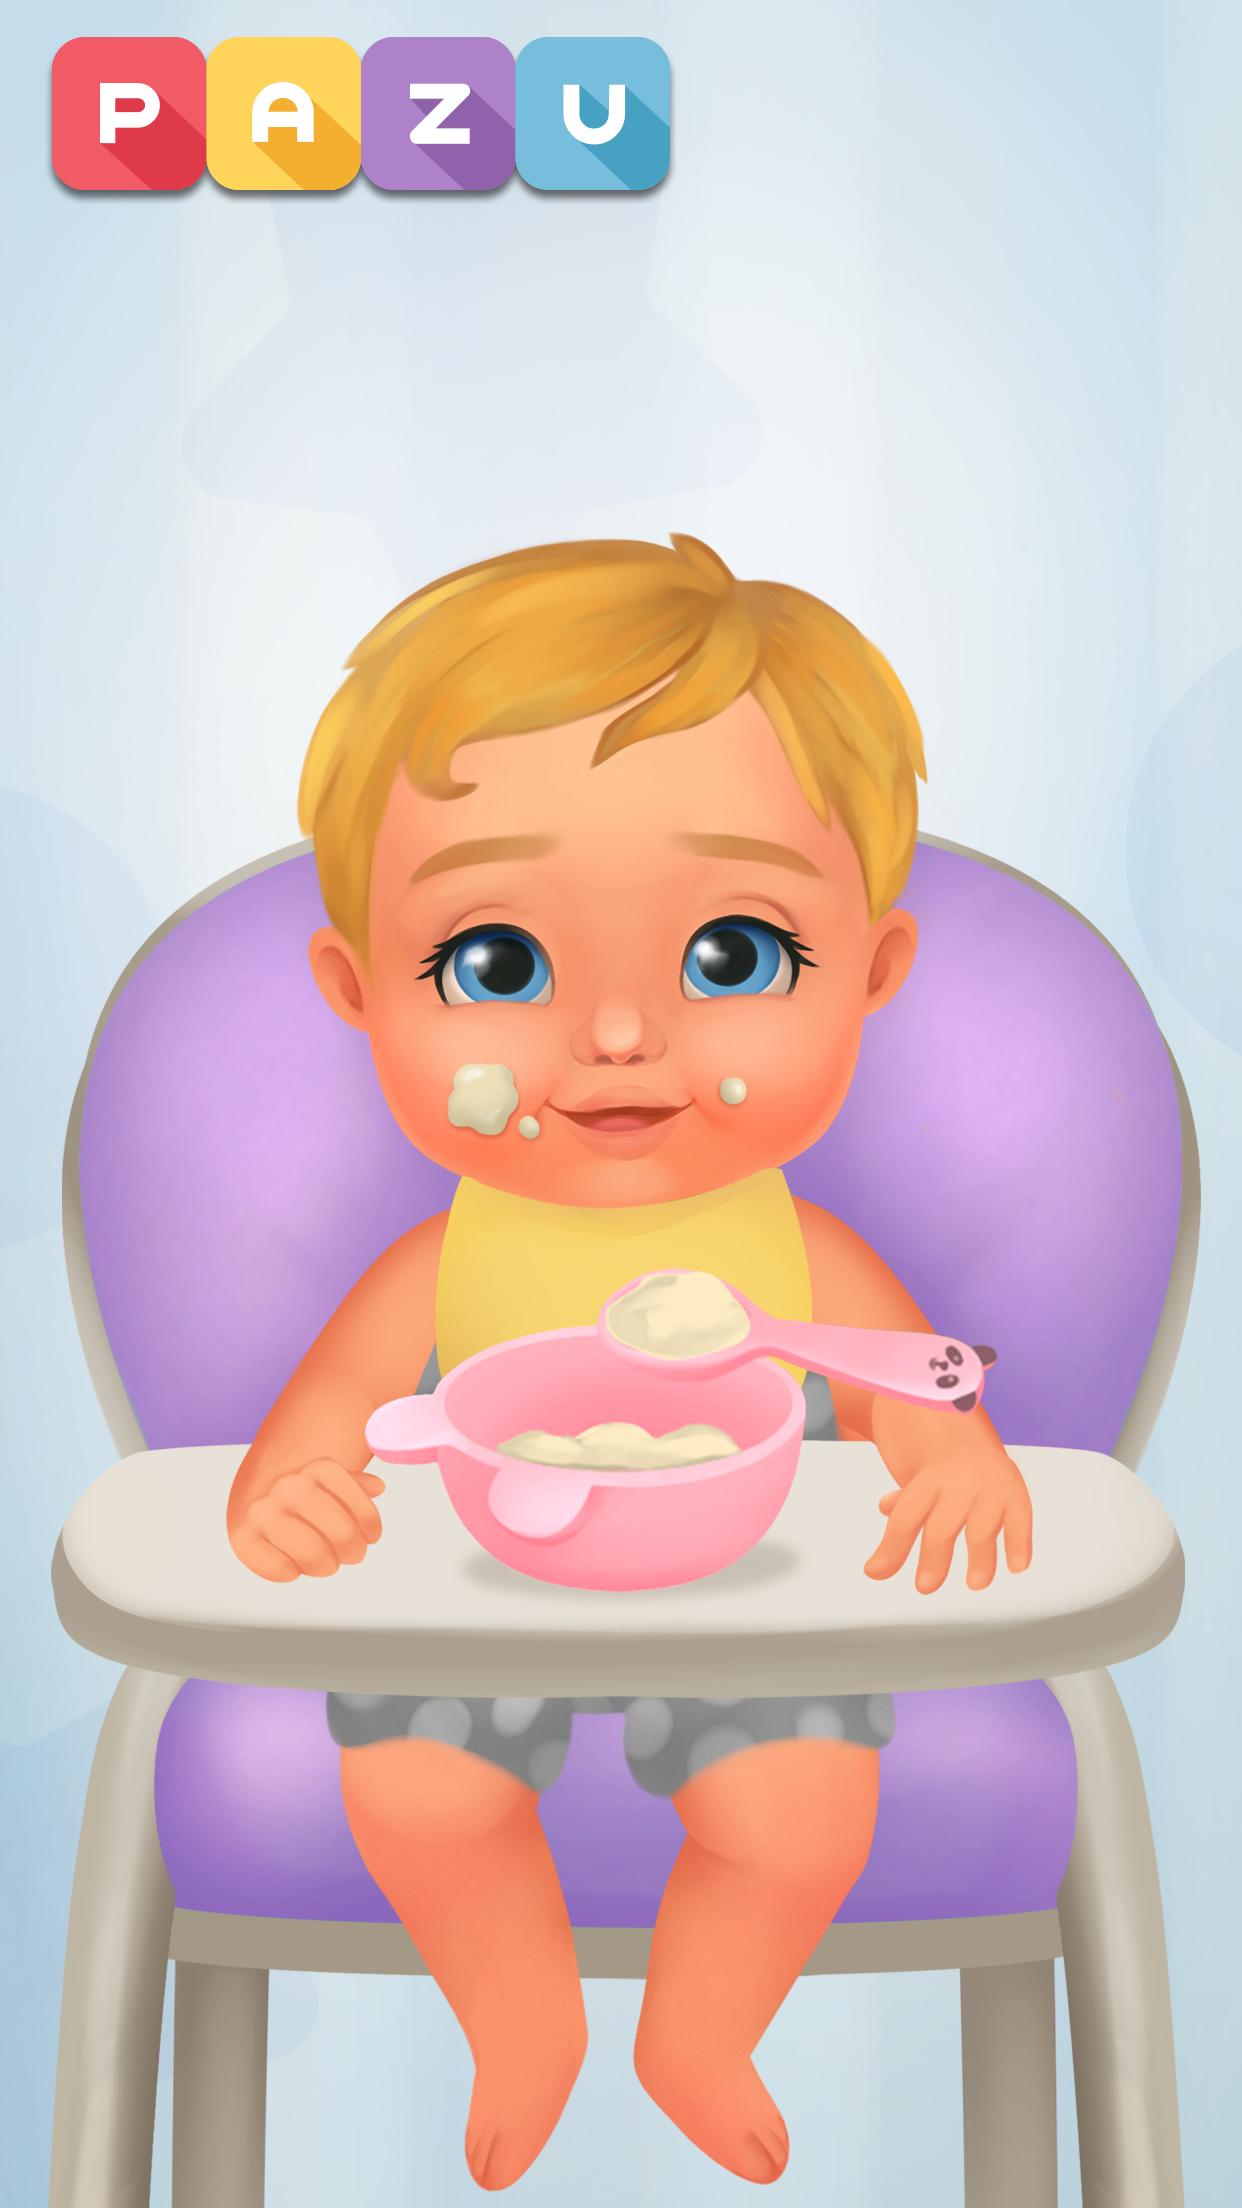 Chic Baby 2 Dress up & baby care games for kids 1.02 Screenshot 6